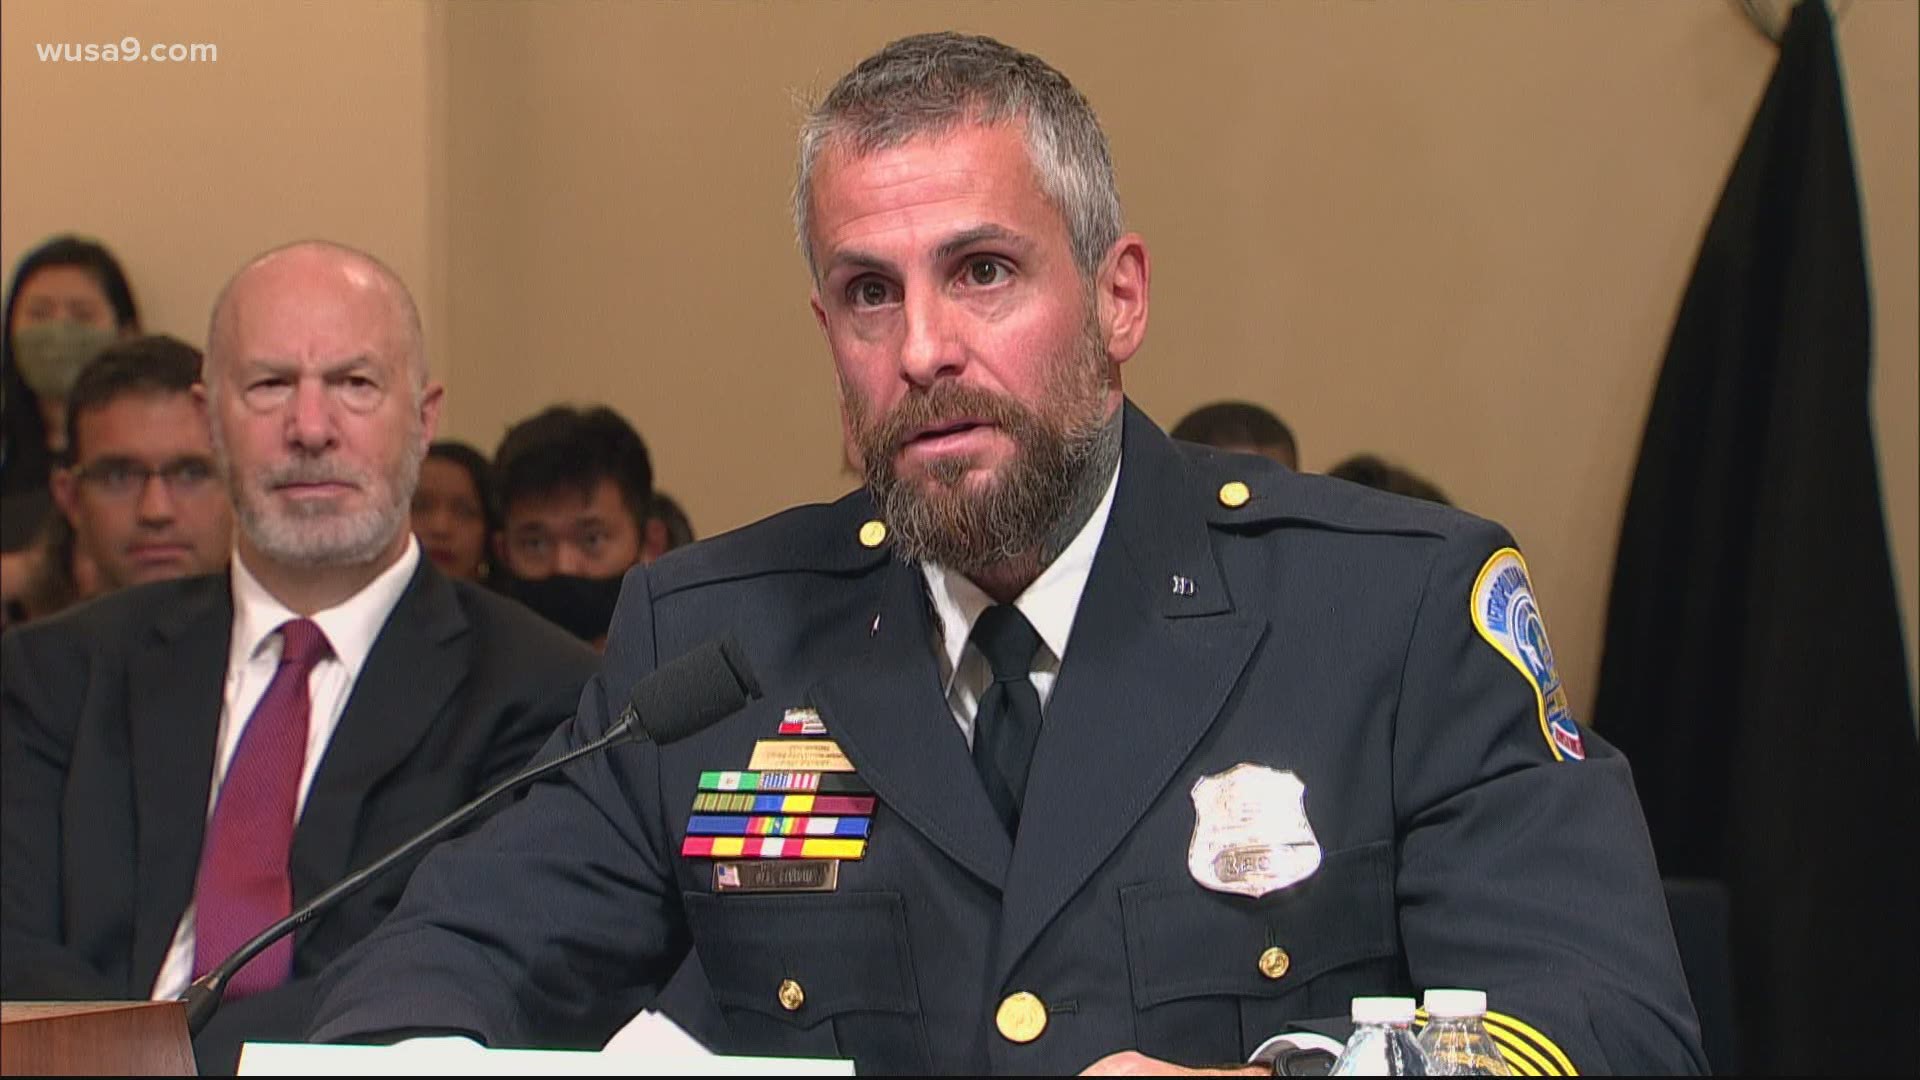 Four Capitol and DC Police officers testified before the House Select Committee on Jan. 6 on Tuesday about the violent assaults they endured.